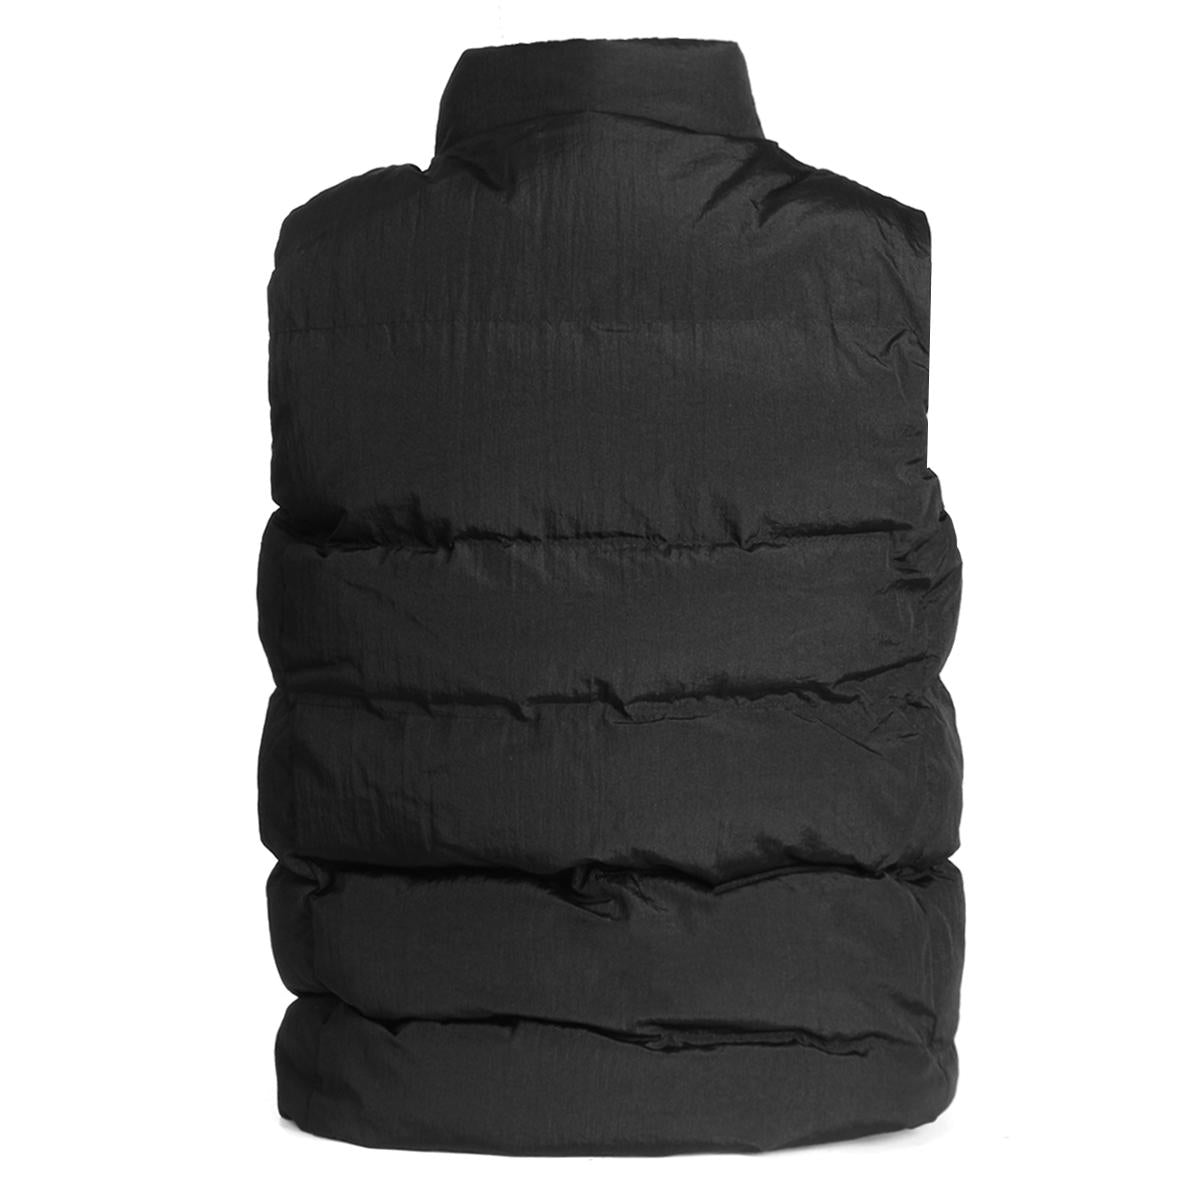 USB Electric Men's Heated Coat Heating Vest Jacket Thermostatic Cloth Winter Warming